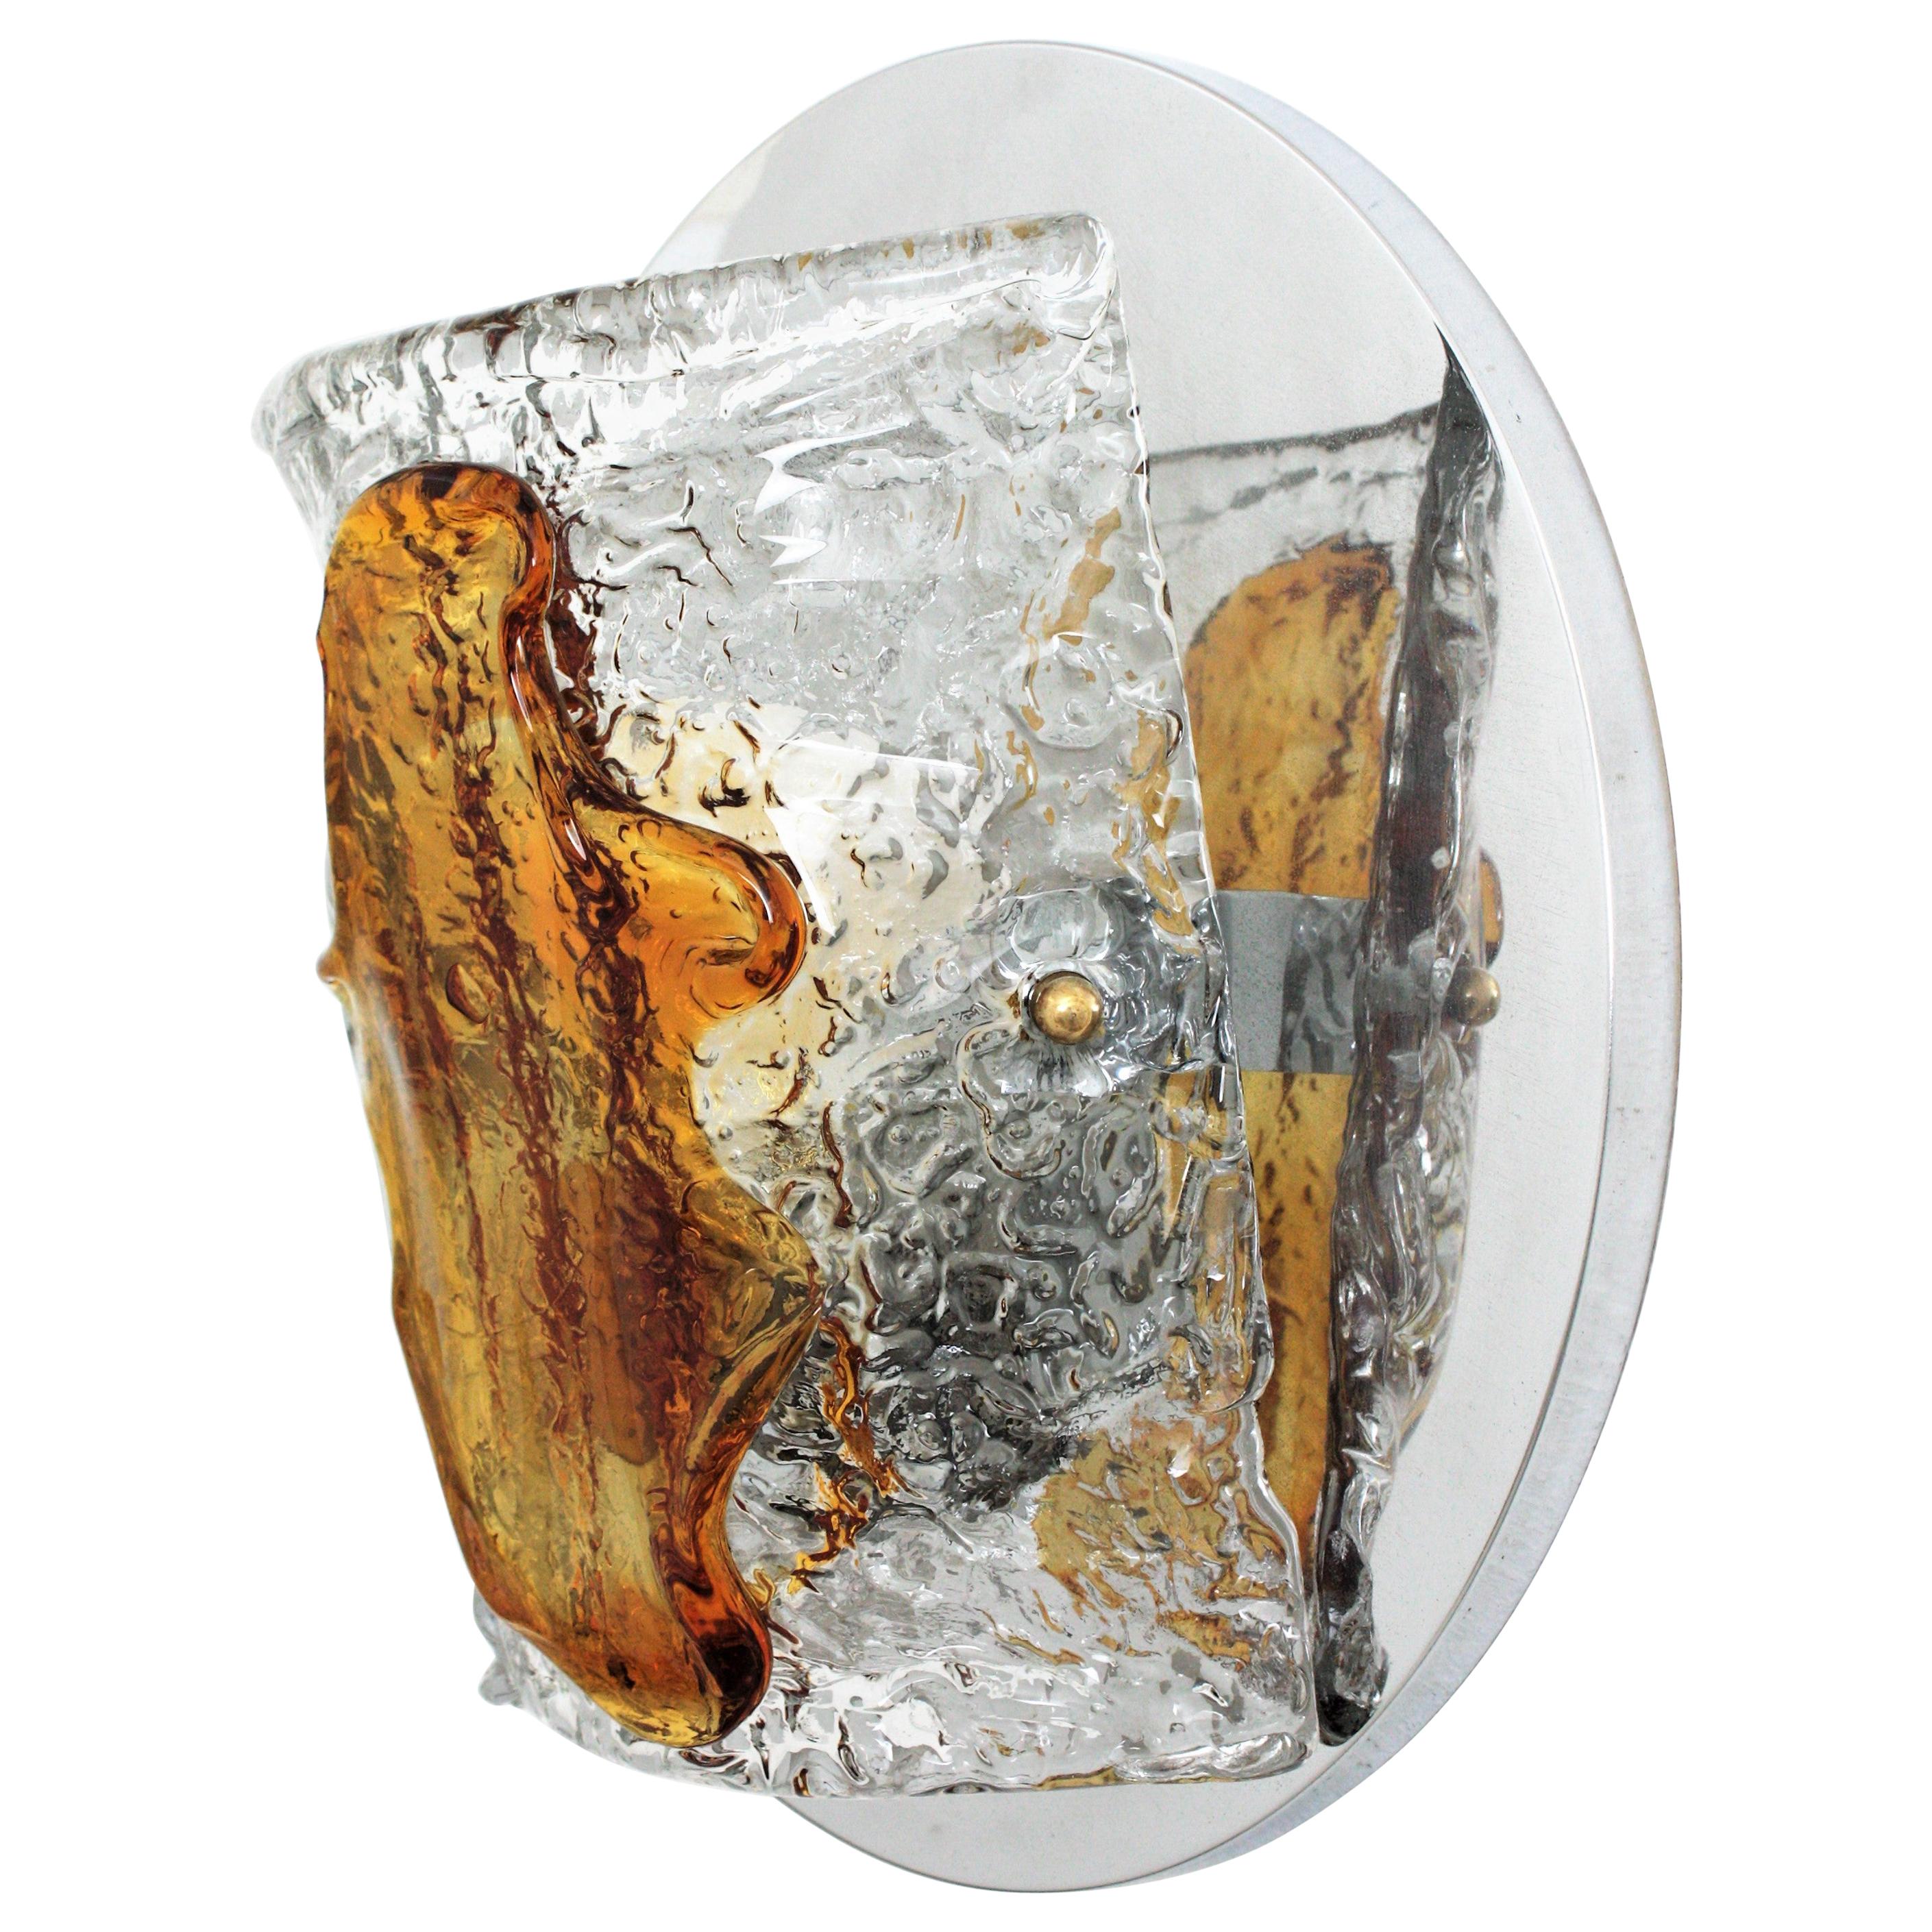 Elegant hand blown amber and clear Murano glass wall sconce by Mazzega, Italy, 1960s.
This beautiful wall light features a circular chromed steel backplate holding a half-cylinder glass shade in textured clear and amber glass.
This light fixture